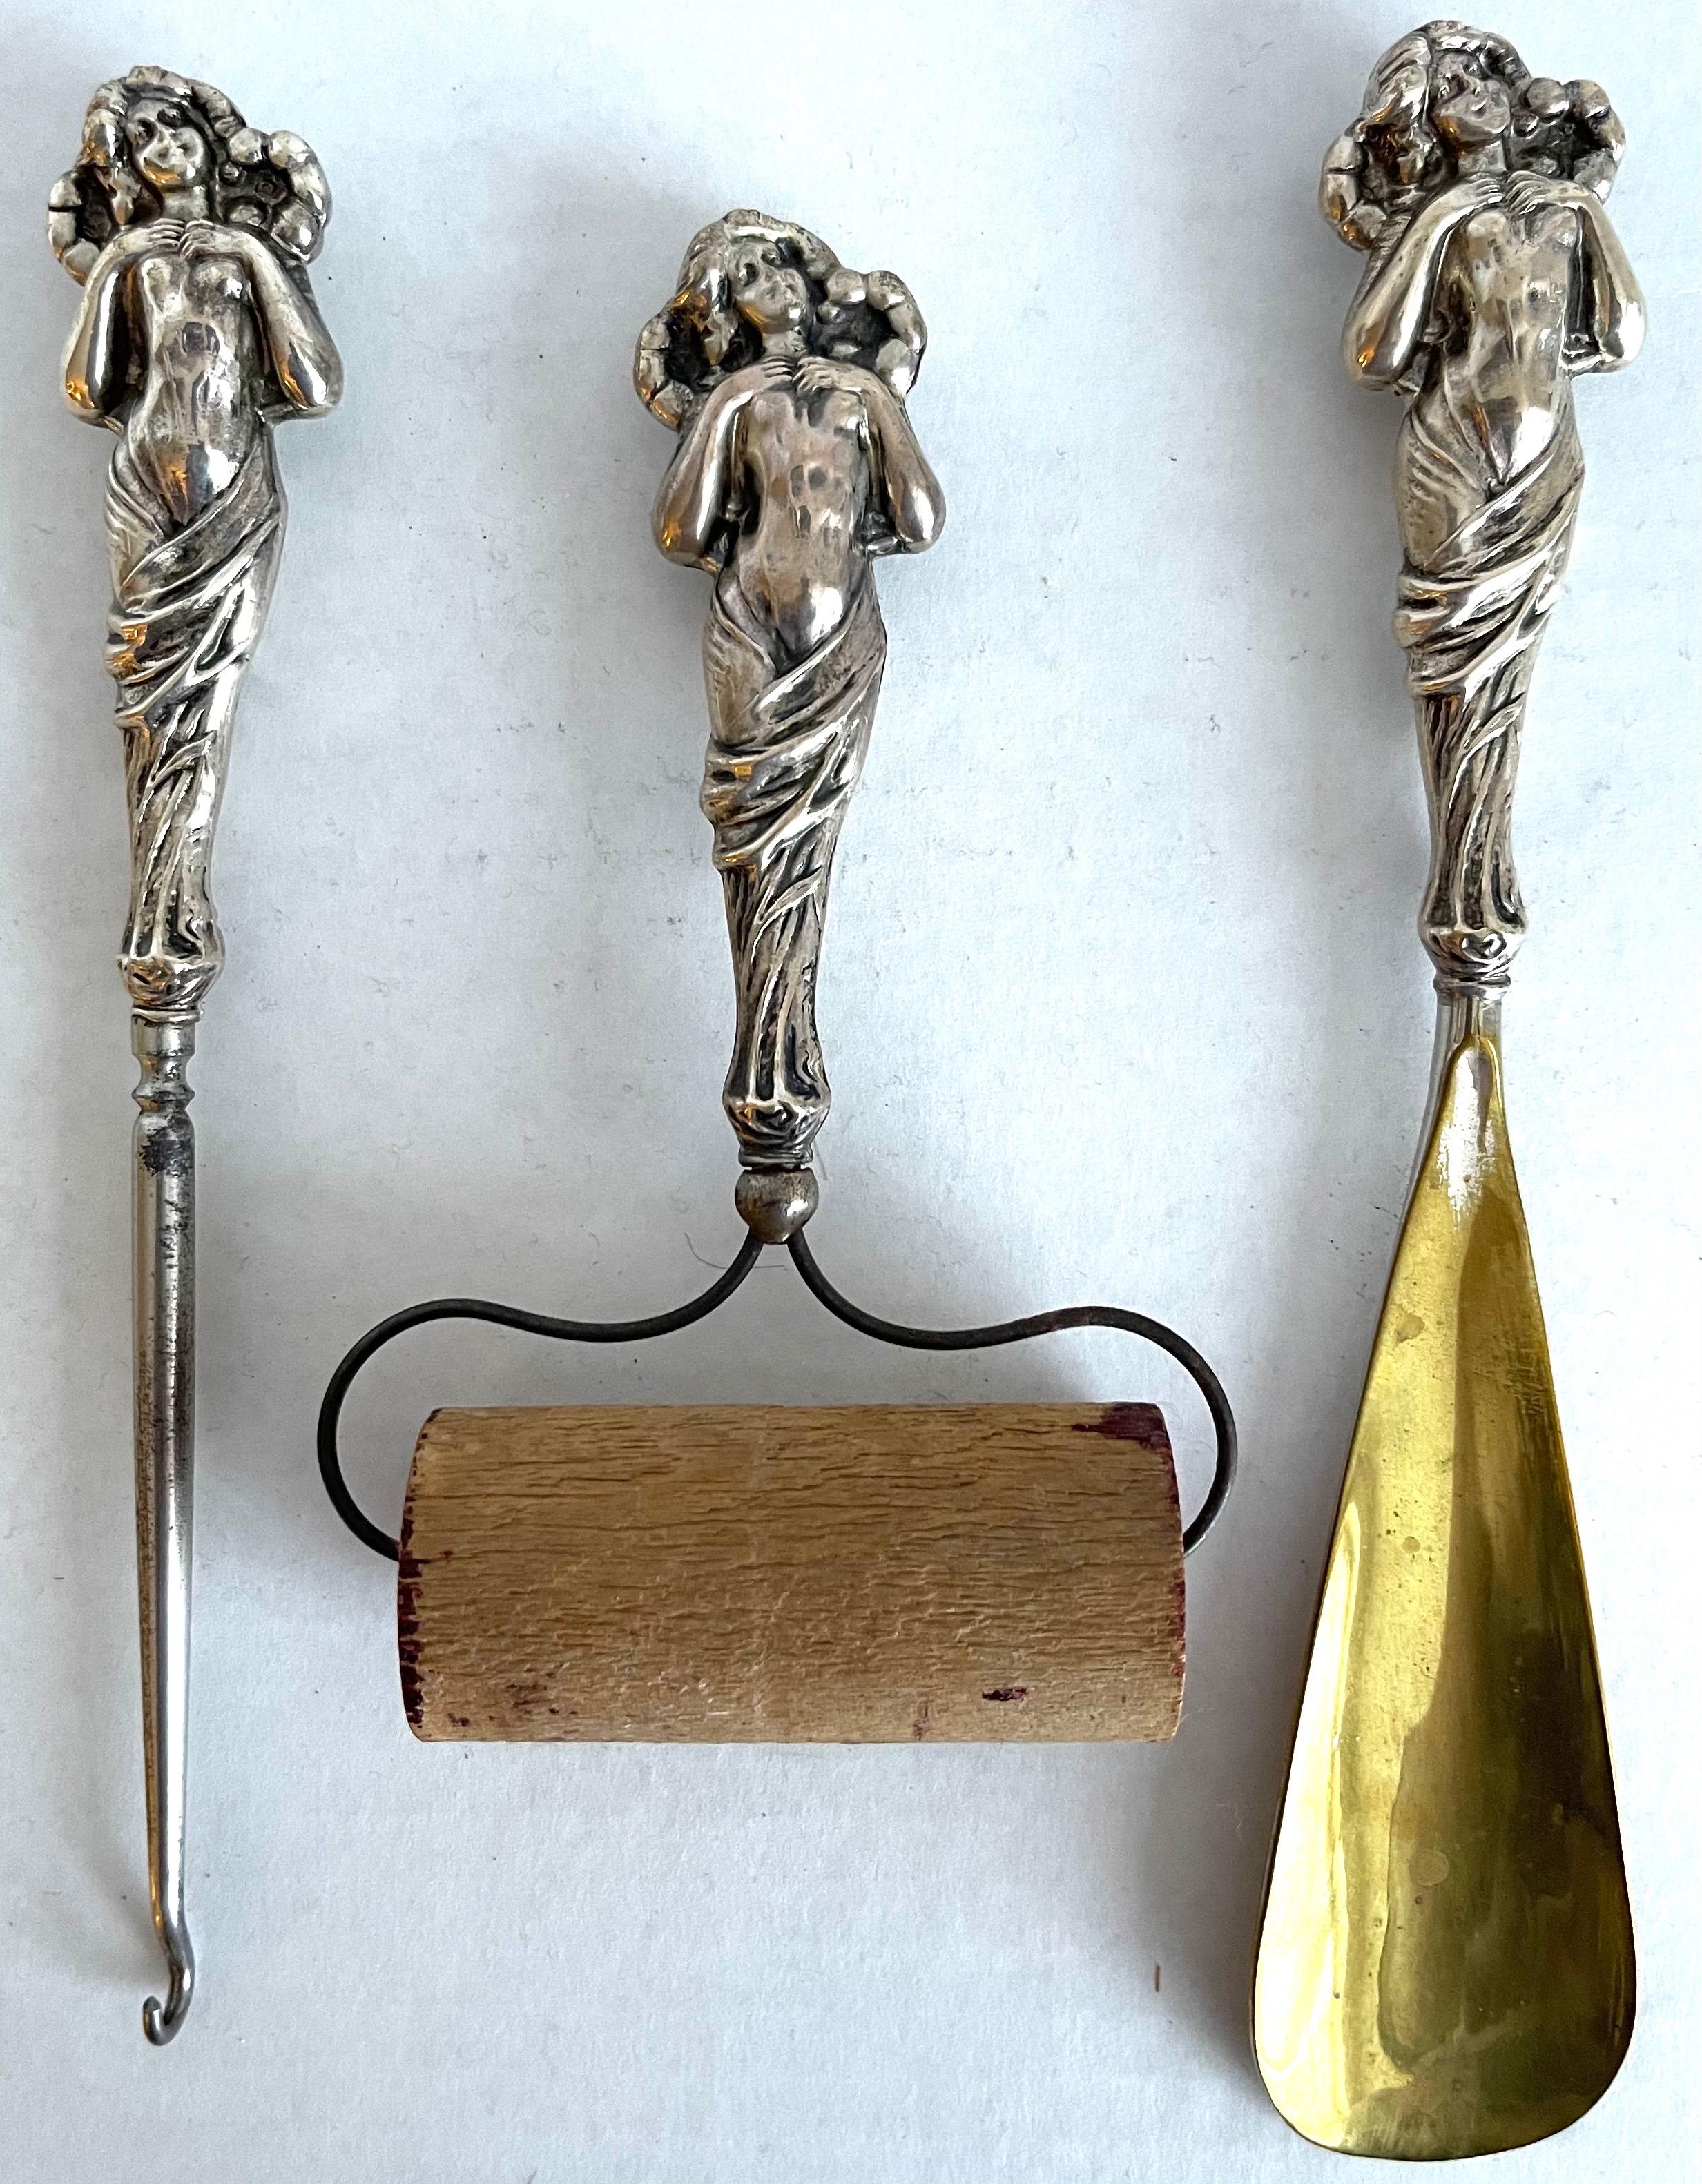 Set of 3 Art Nouveau Sterling silver vanity tools. American circa 1900. Each piece features a female figurine. Tools include, button hook, shoe horn with brass horn and roller. 
Weighted Sterling, each piece is stamped Sterling.